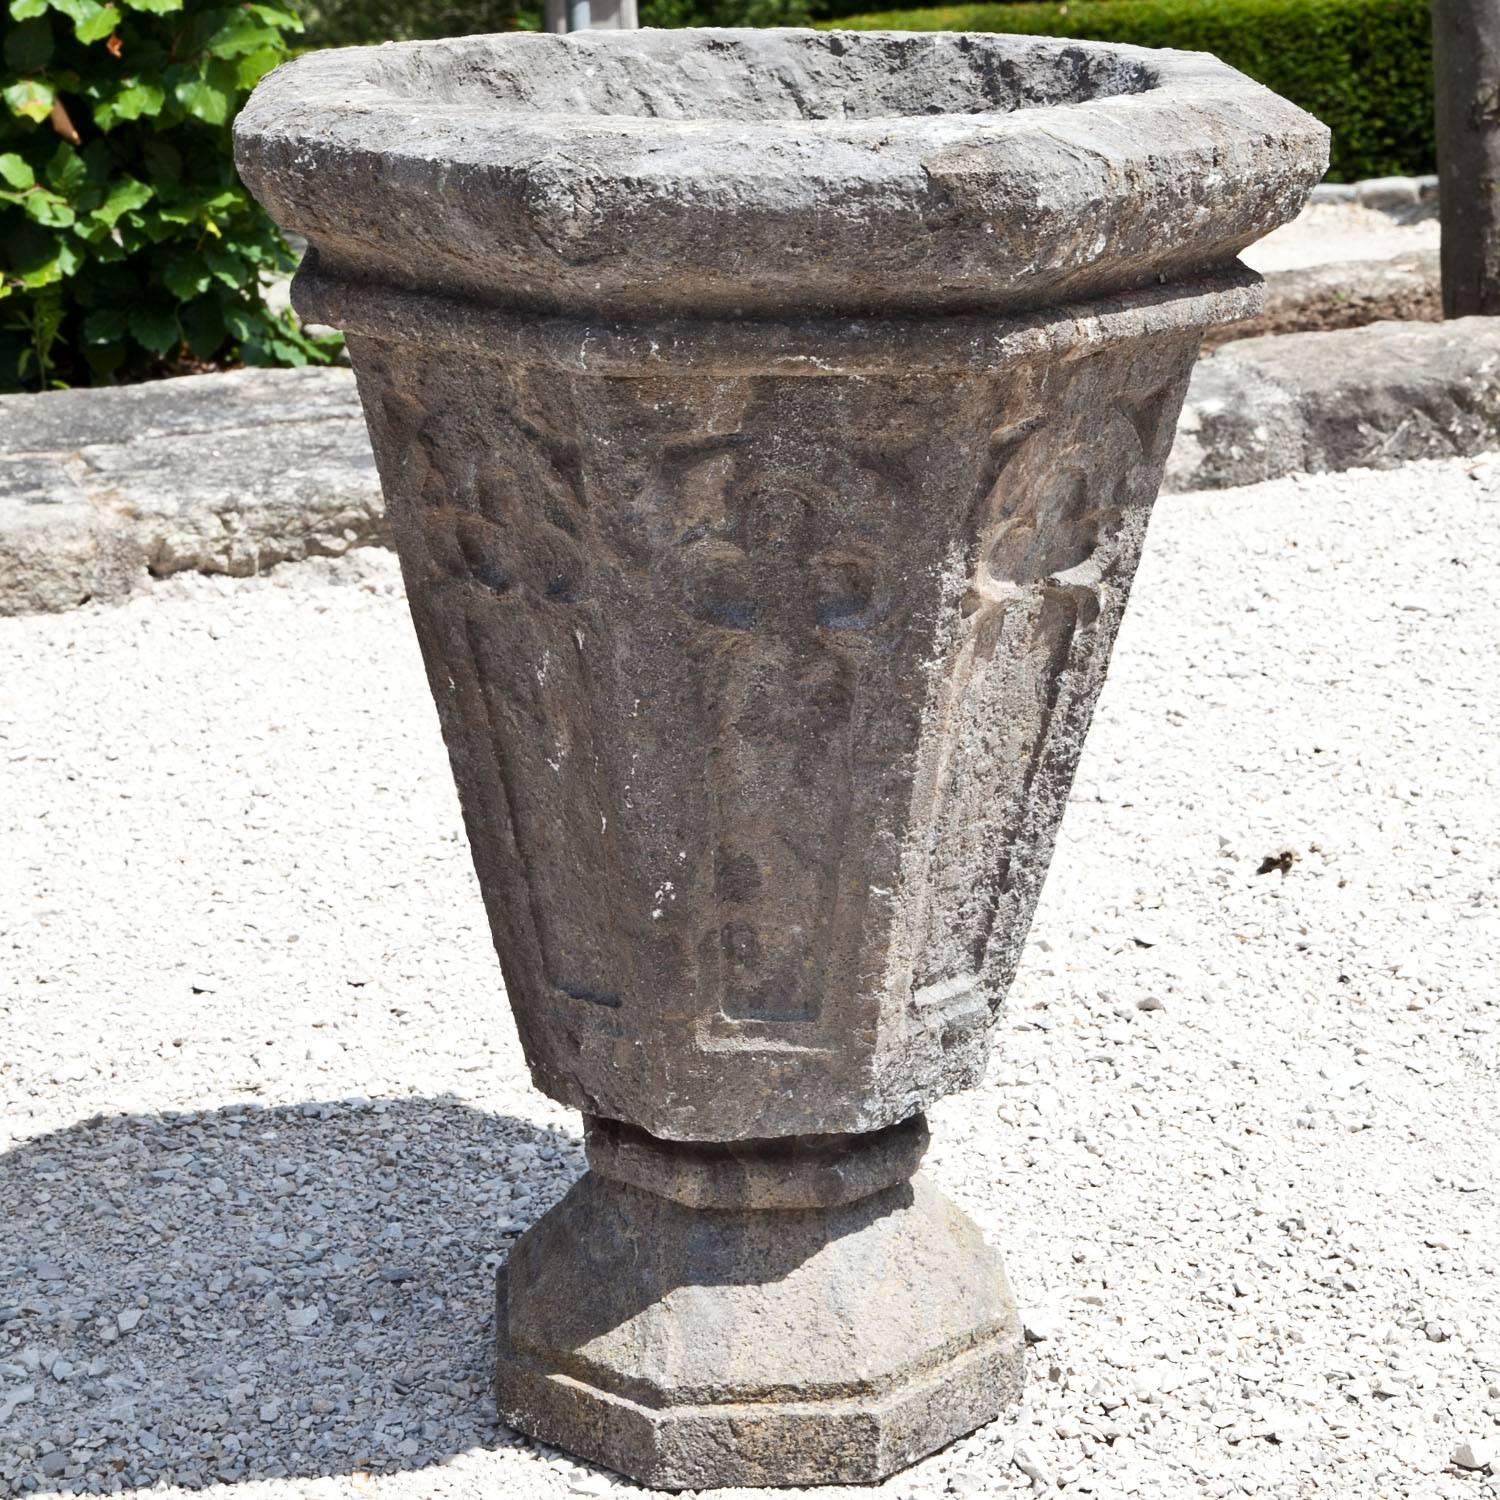 Pair of Gothic-style planters out of bluestone, with a hexagonal and slightly tapered body and trefoils on each section.